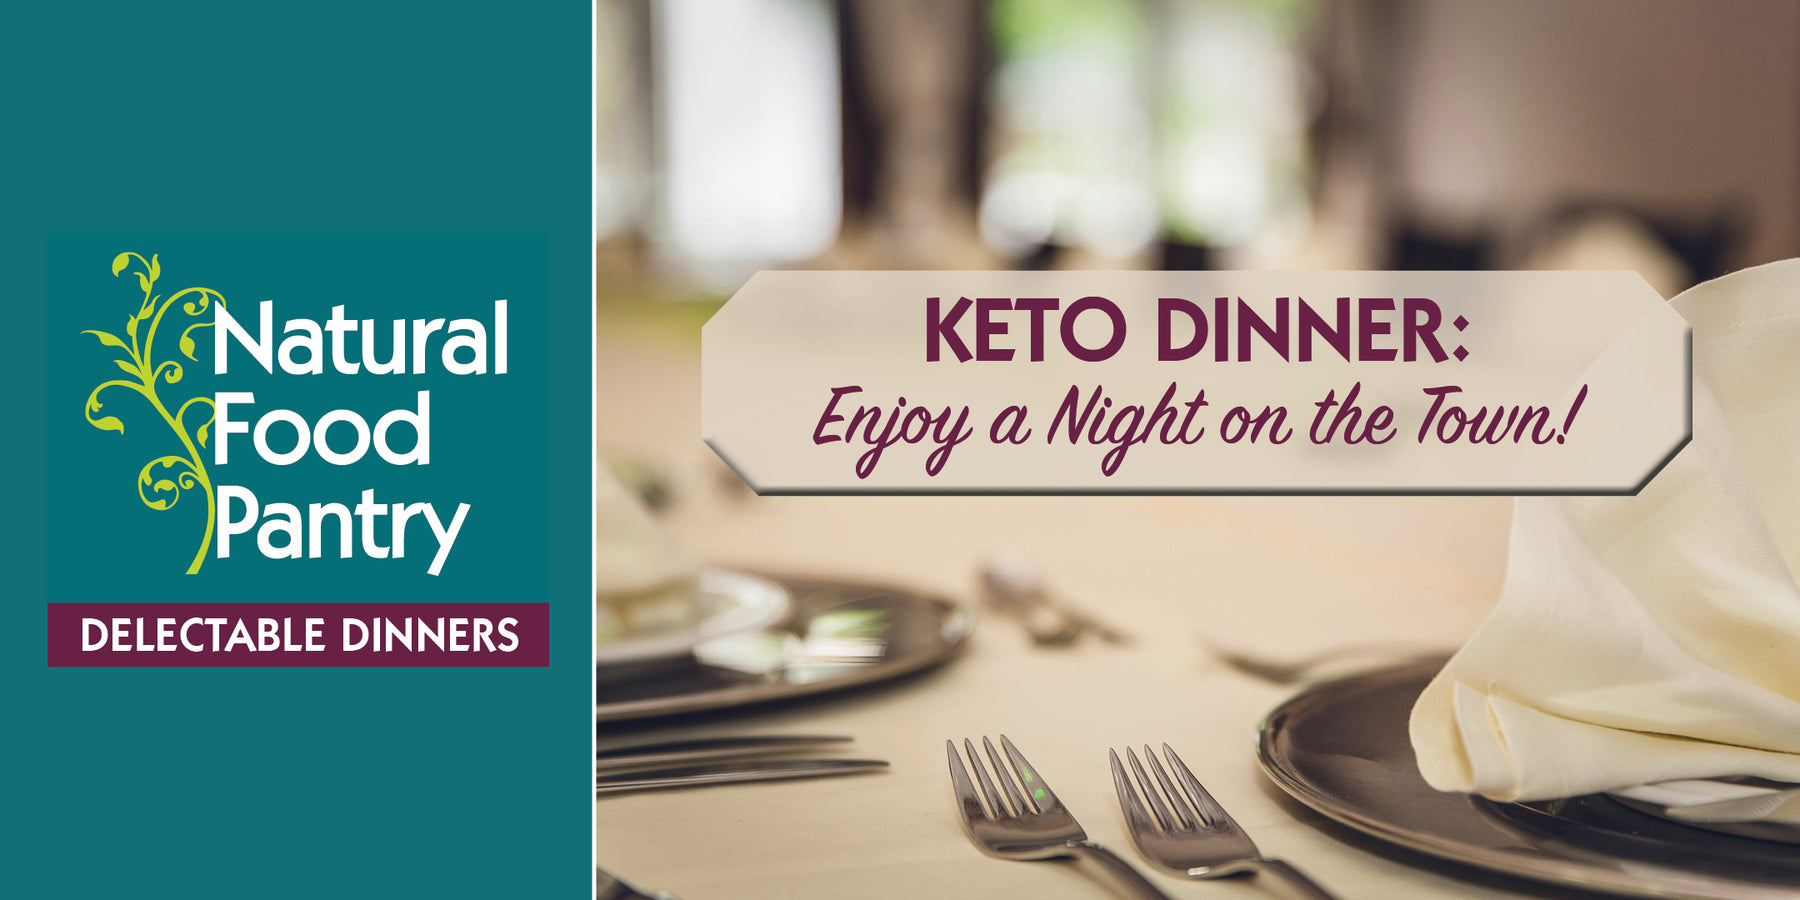 Jan 31: NFP KETO DINNER - Enjoy a night on the town keto style!